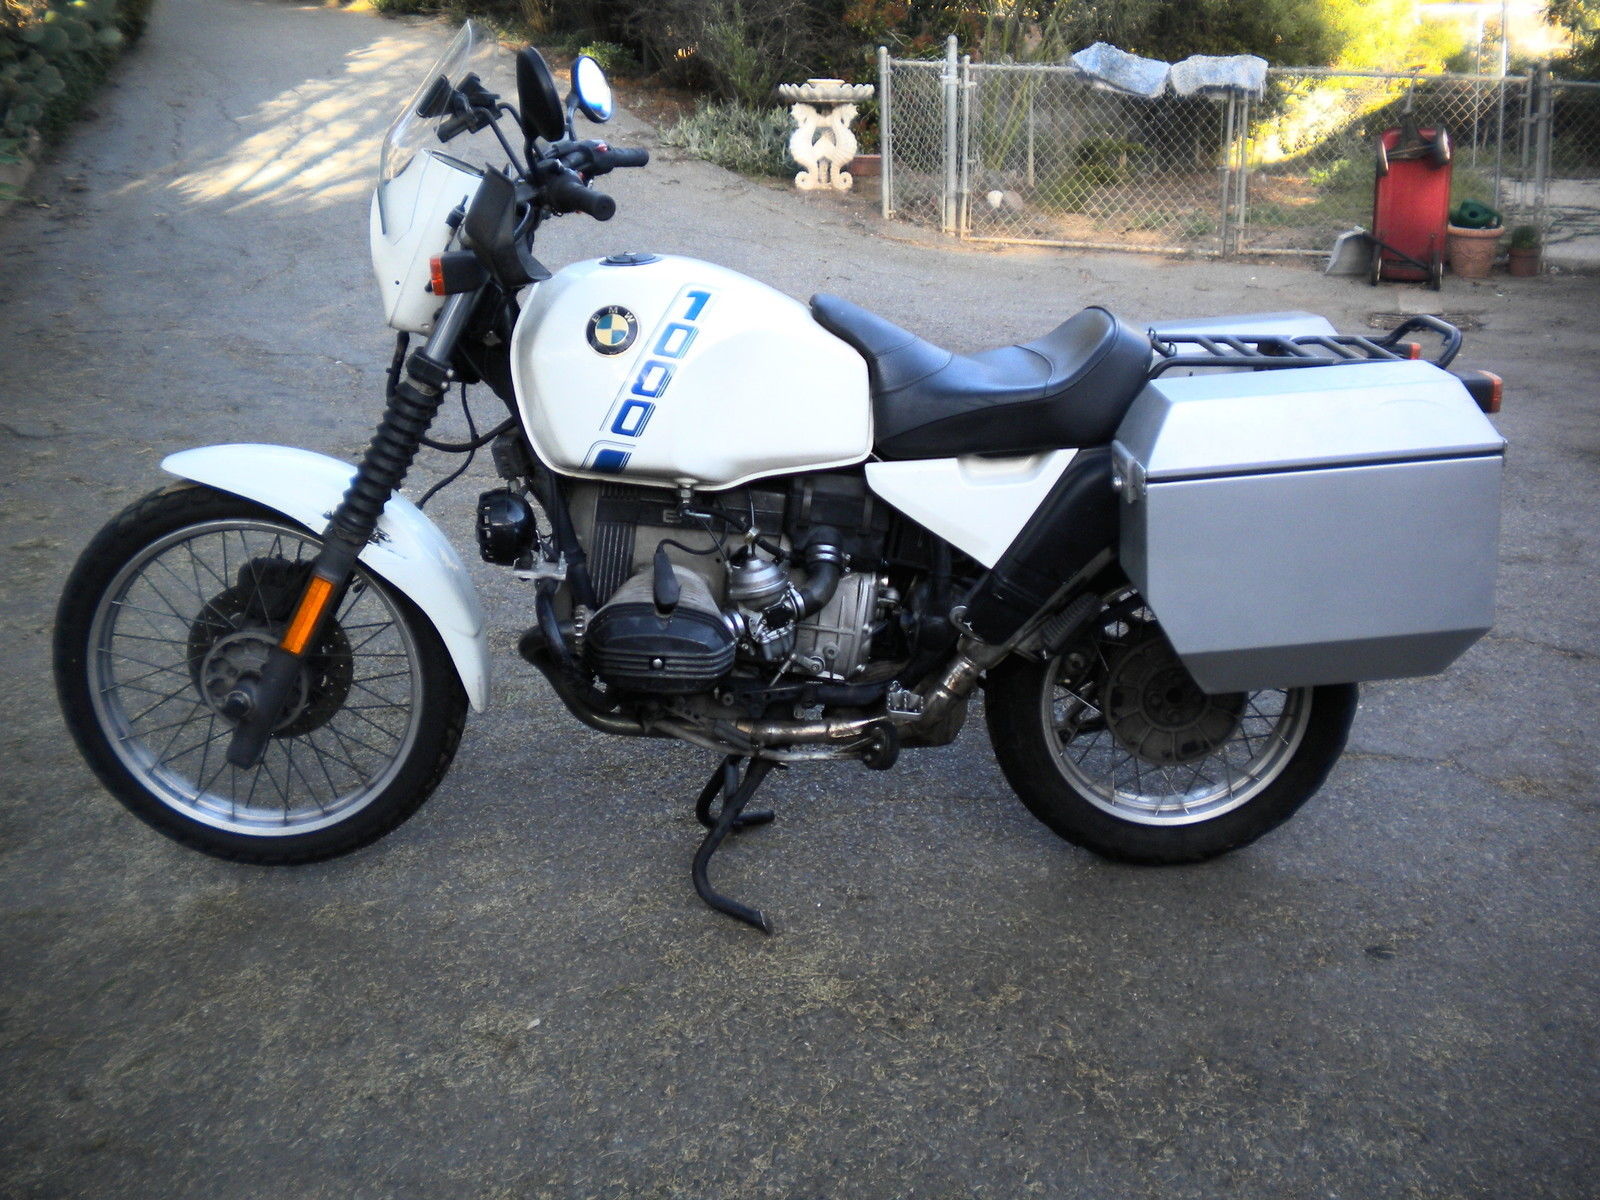 Bmw r100gs for sale uk #5